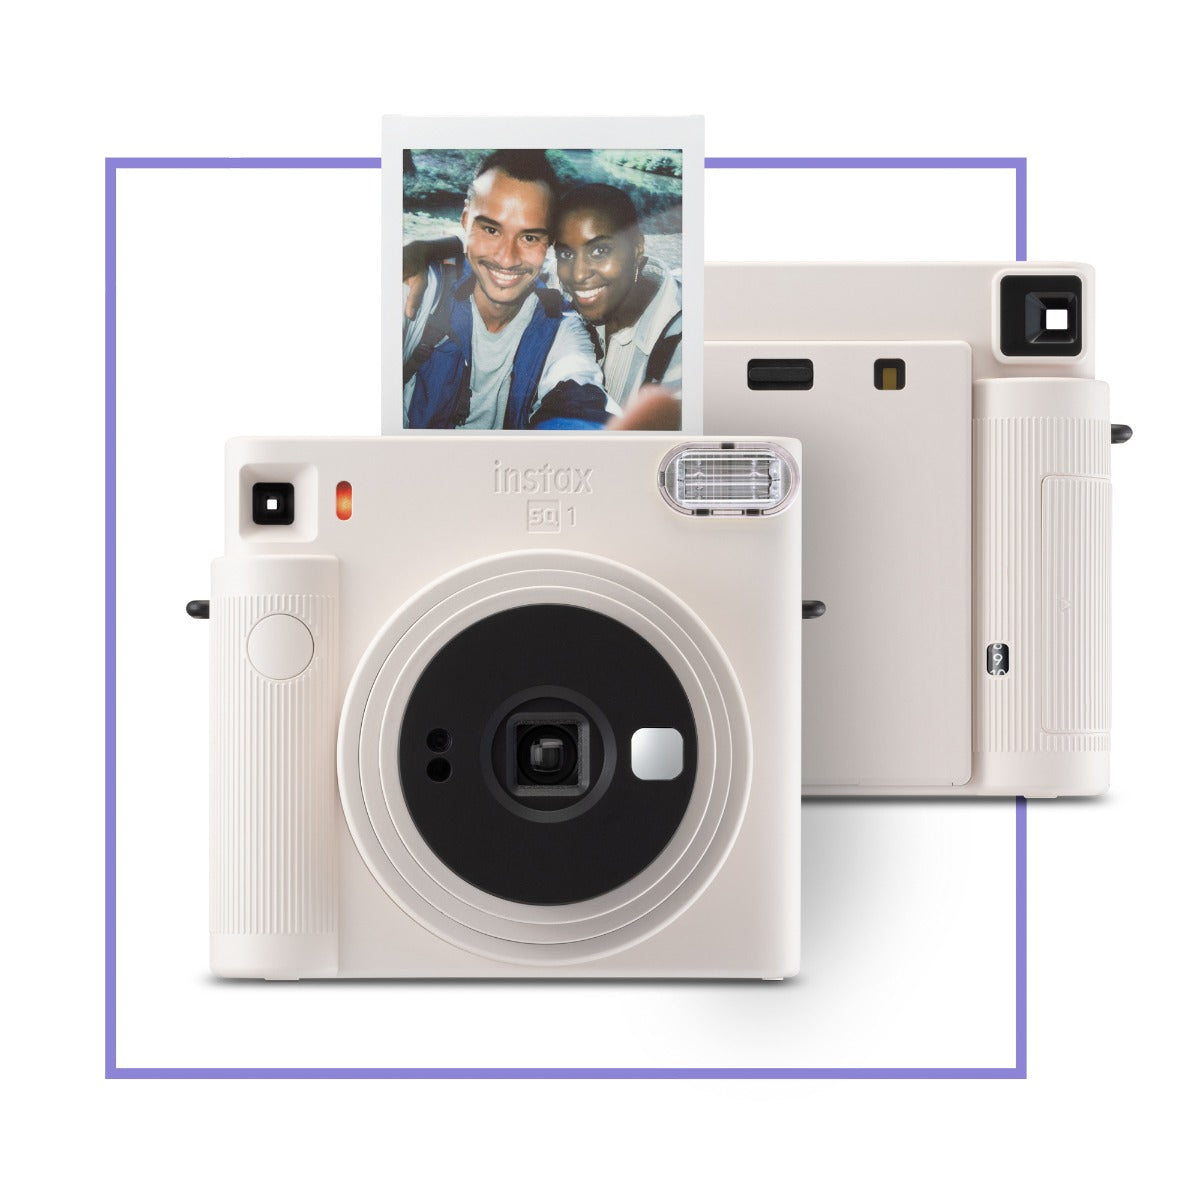 Fuji Instax Sq1 Instant Camera Chalk White Front and Back